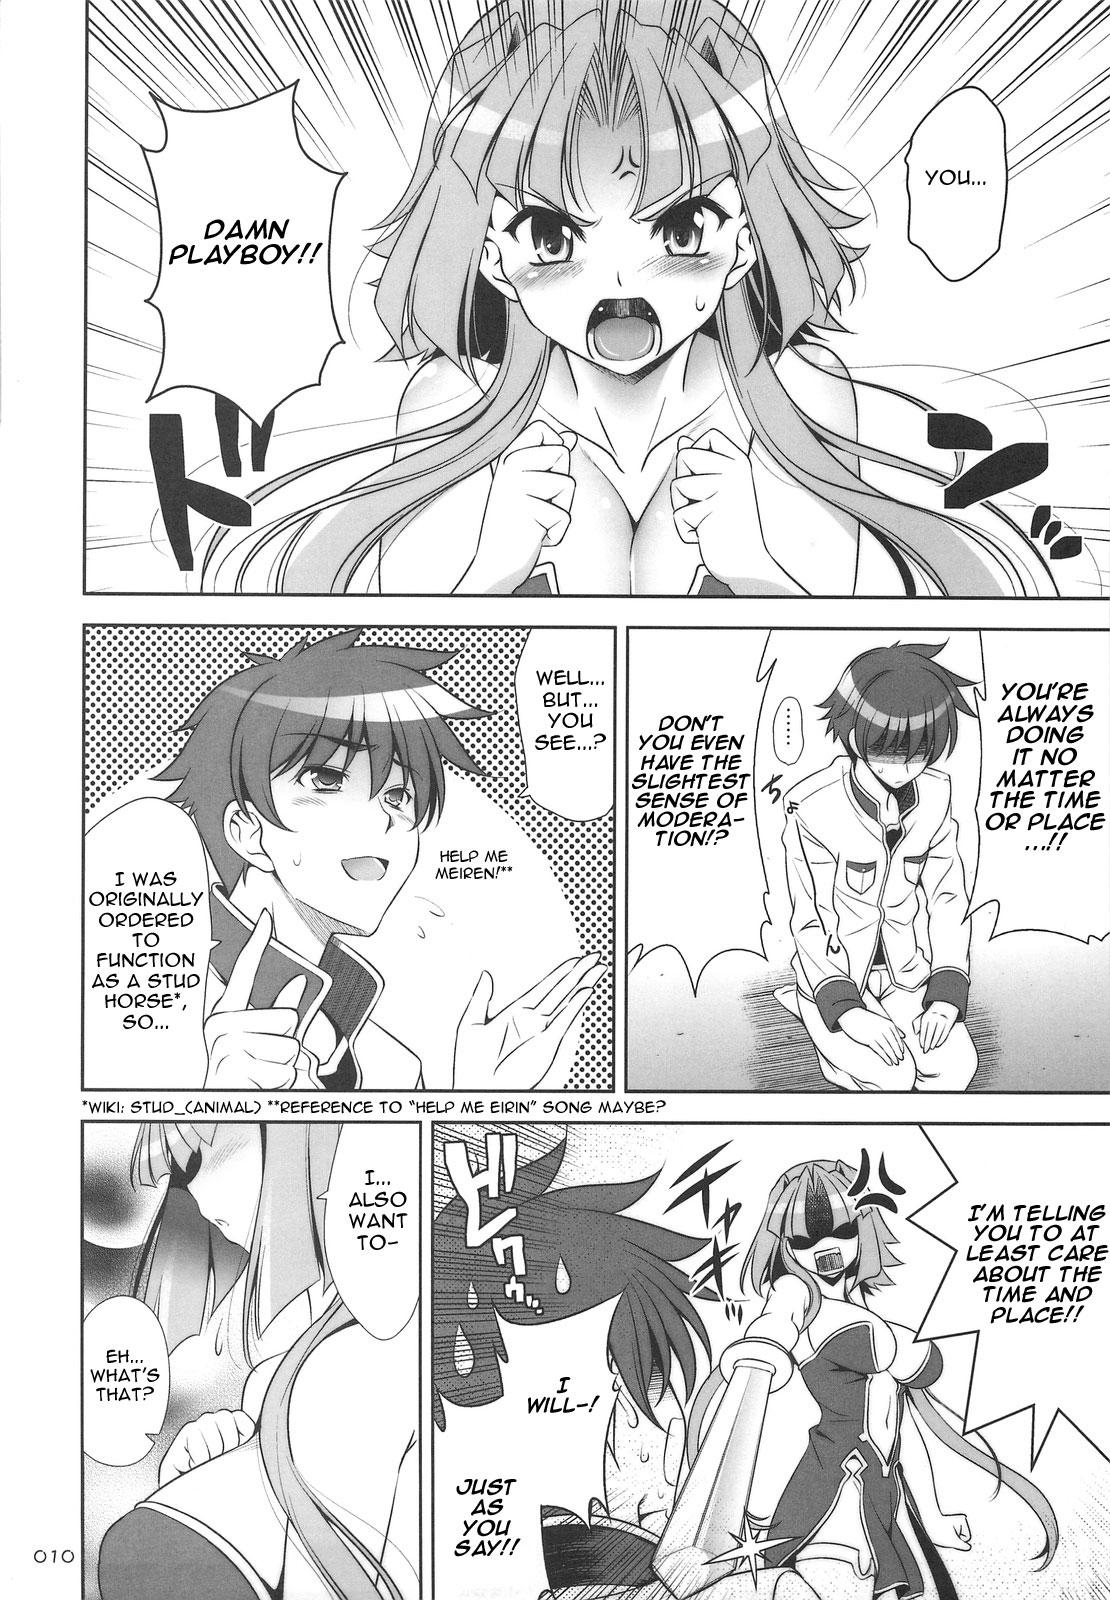 Licking GO! My Way - Koihime musou Trans - Page 9